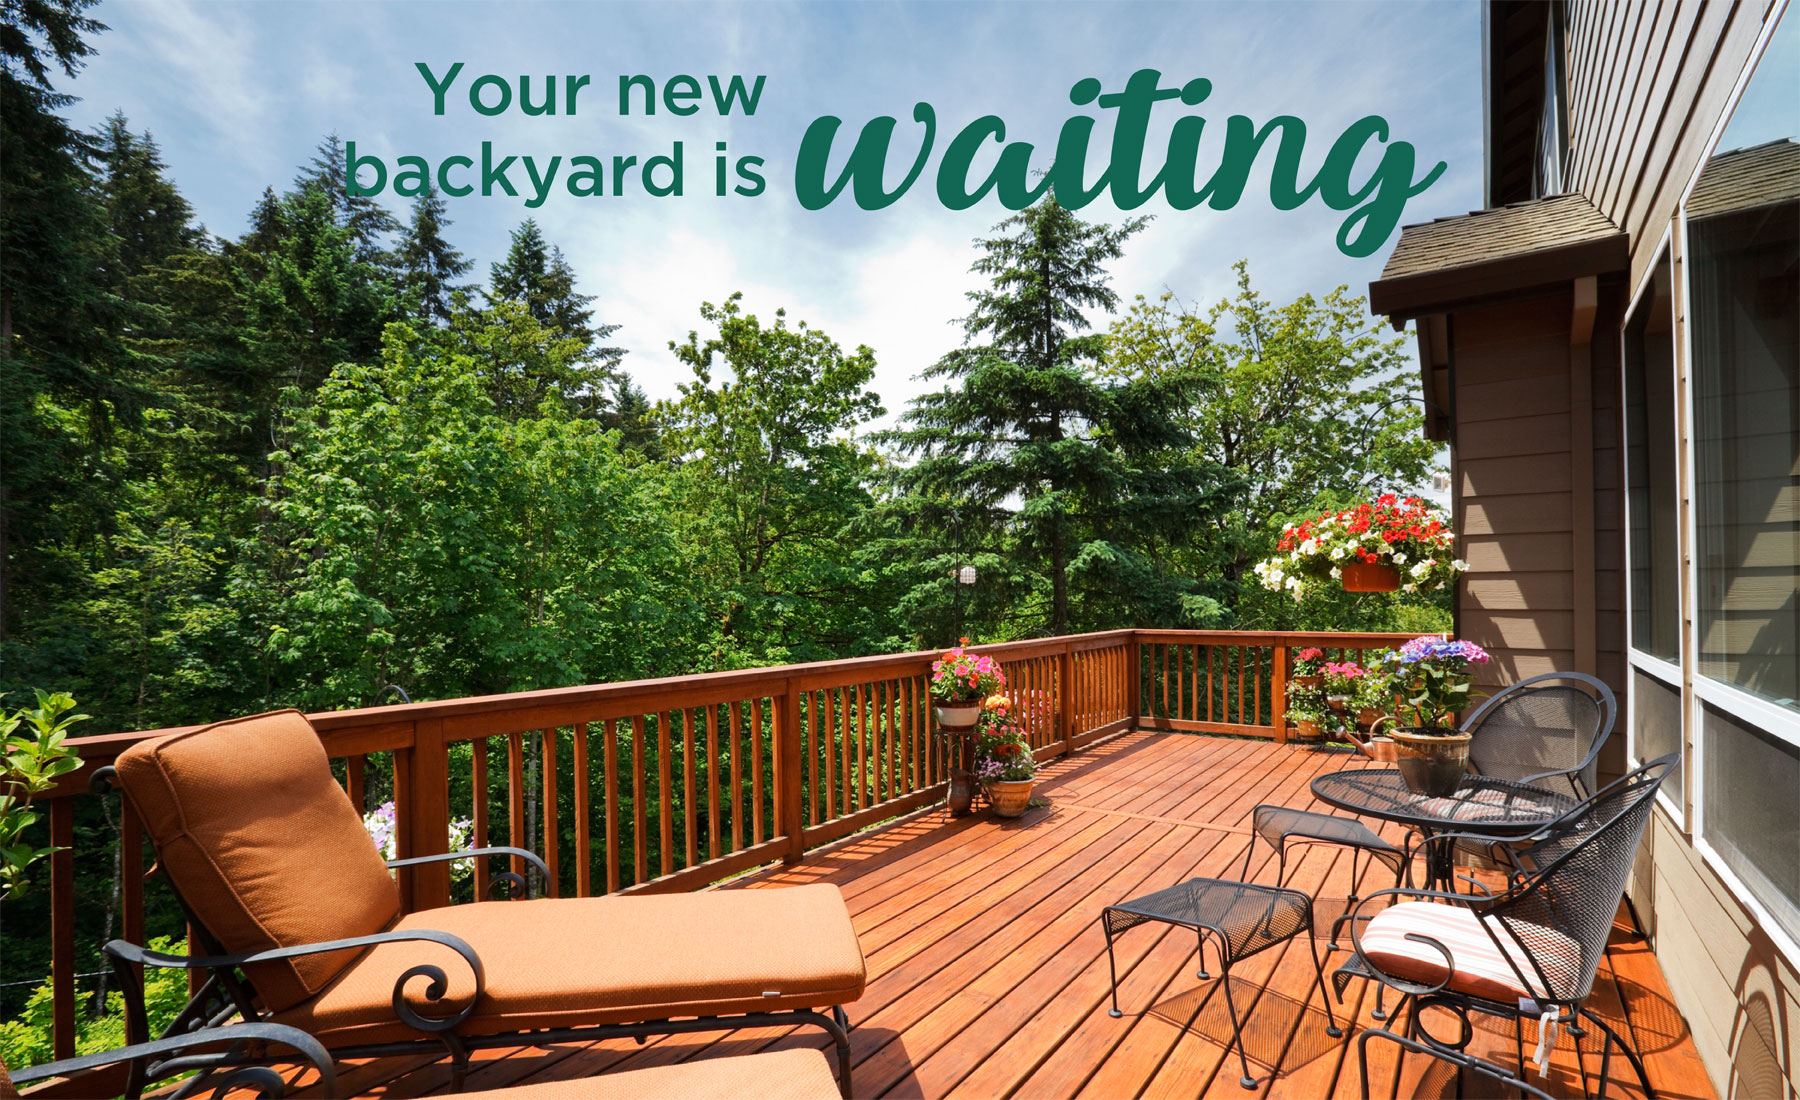 Your new backyard is waiting